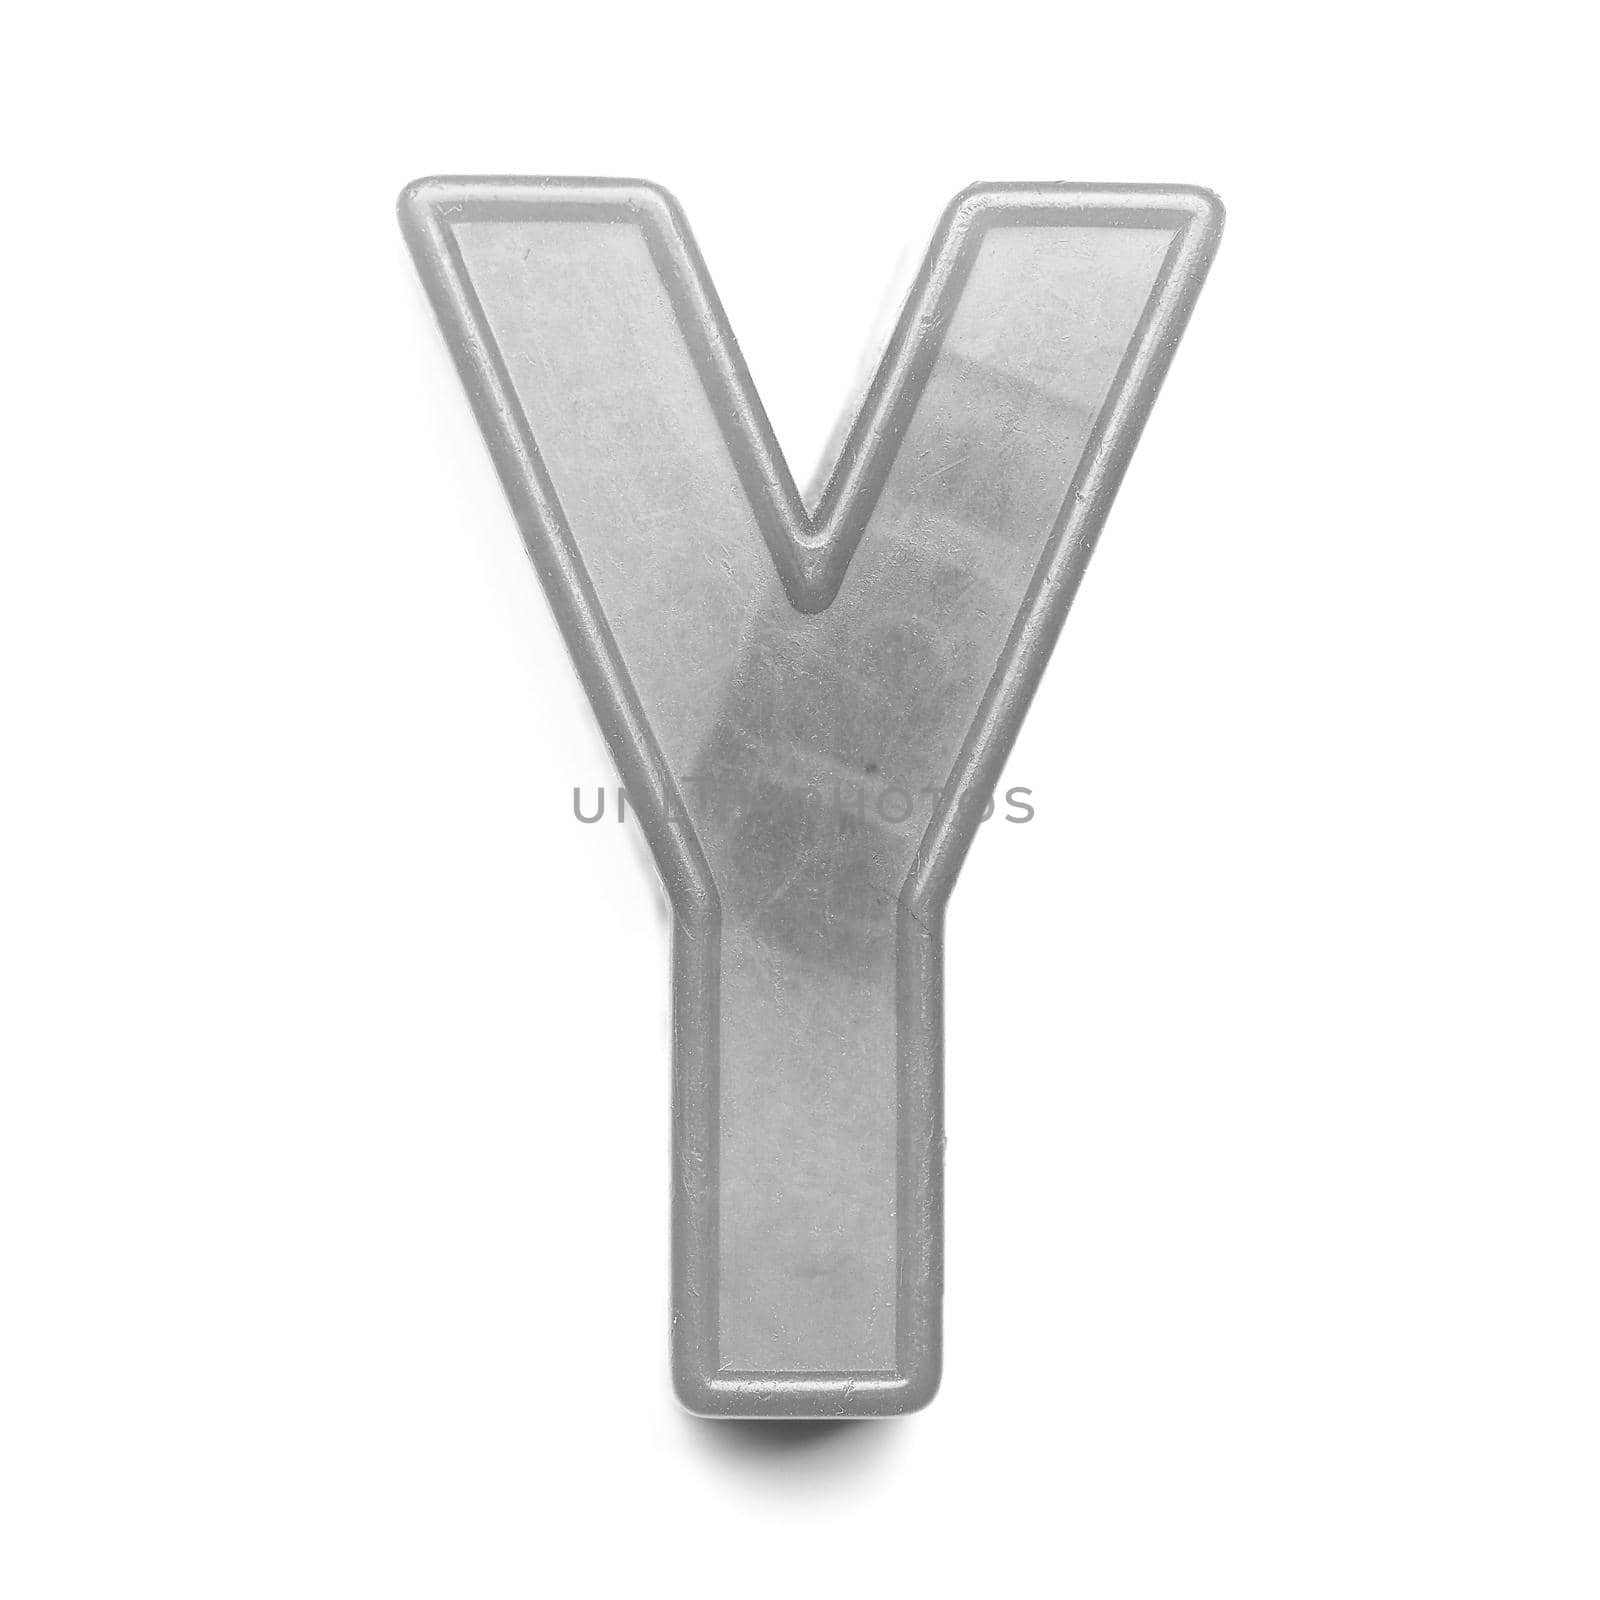 Magnetic uppercase letter Y of the British alphabet in black and white